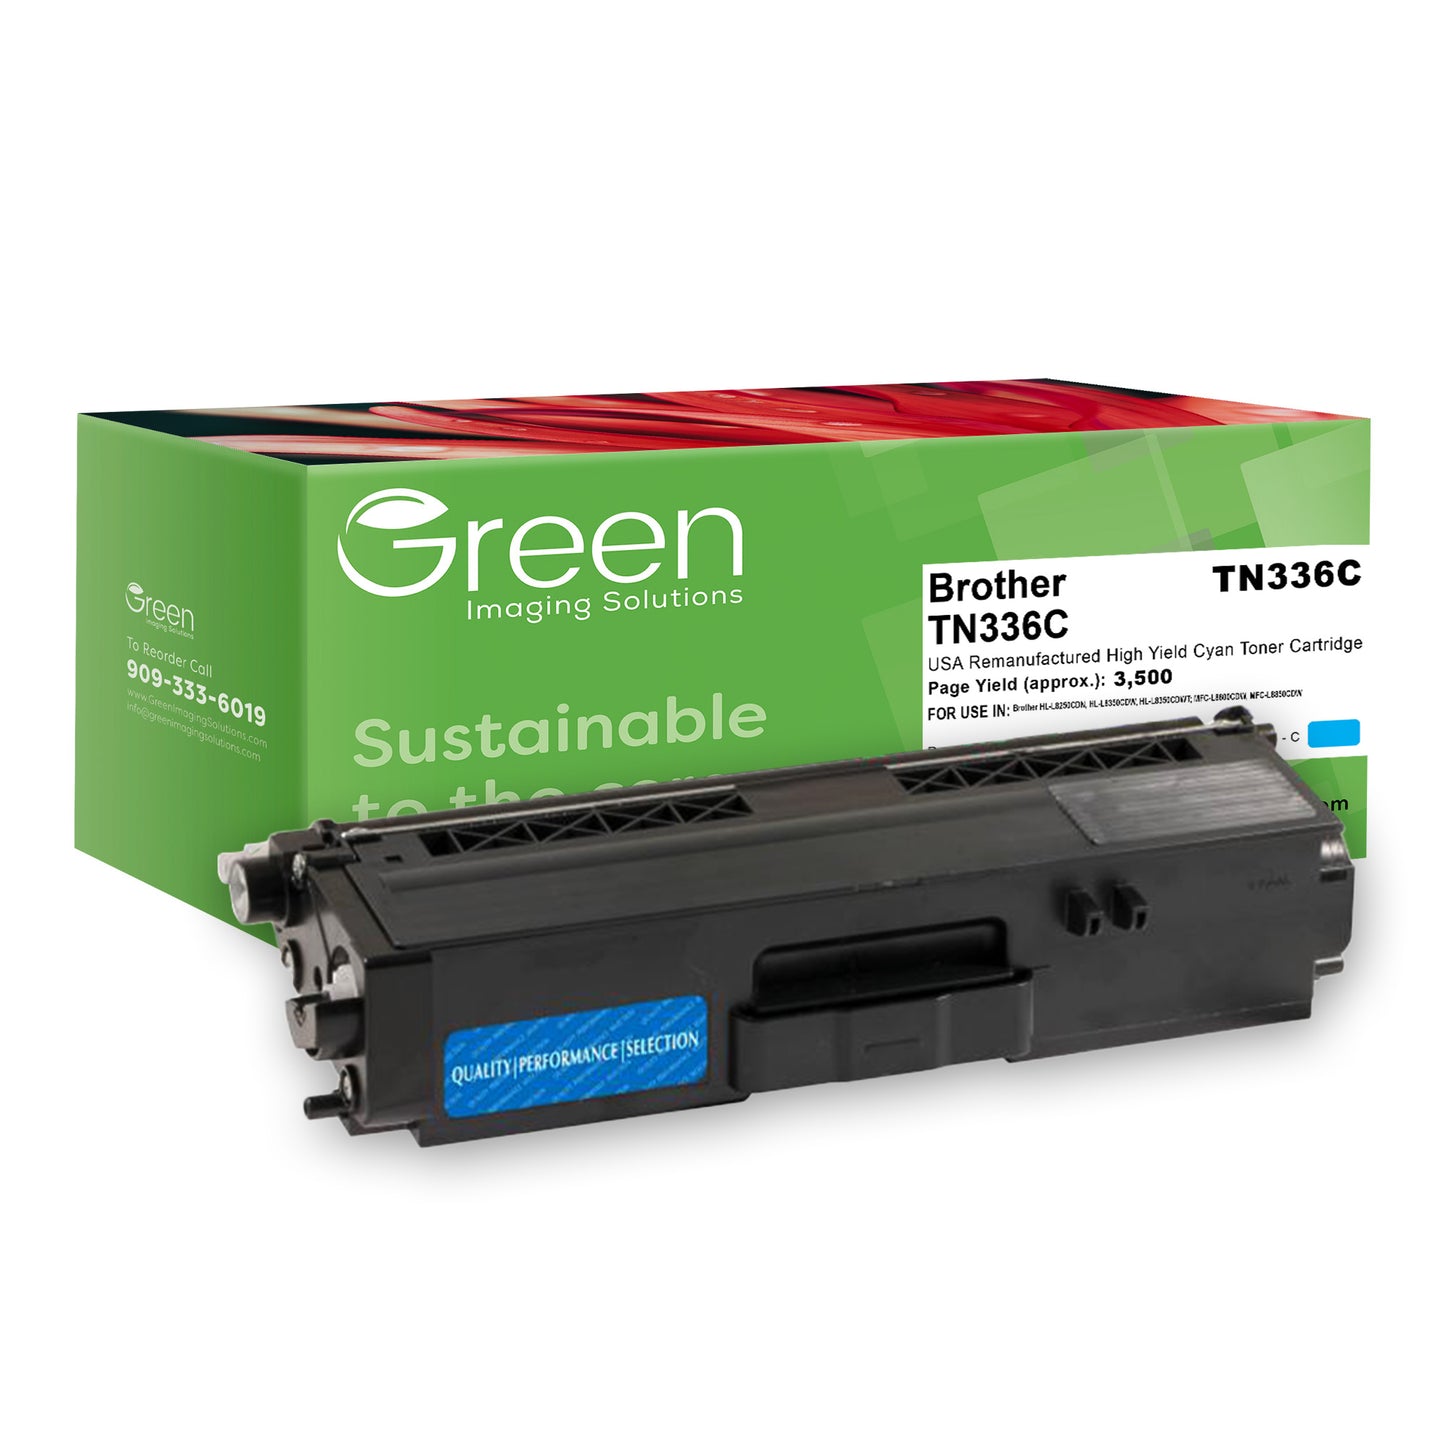 Green Imaging Solutions USA Remanufactured High Yield Cyan Toner Cartridge for Brother TN336